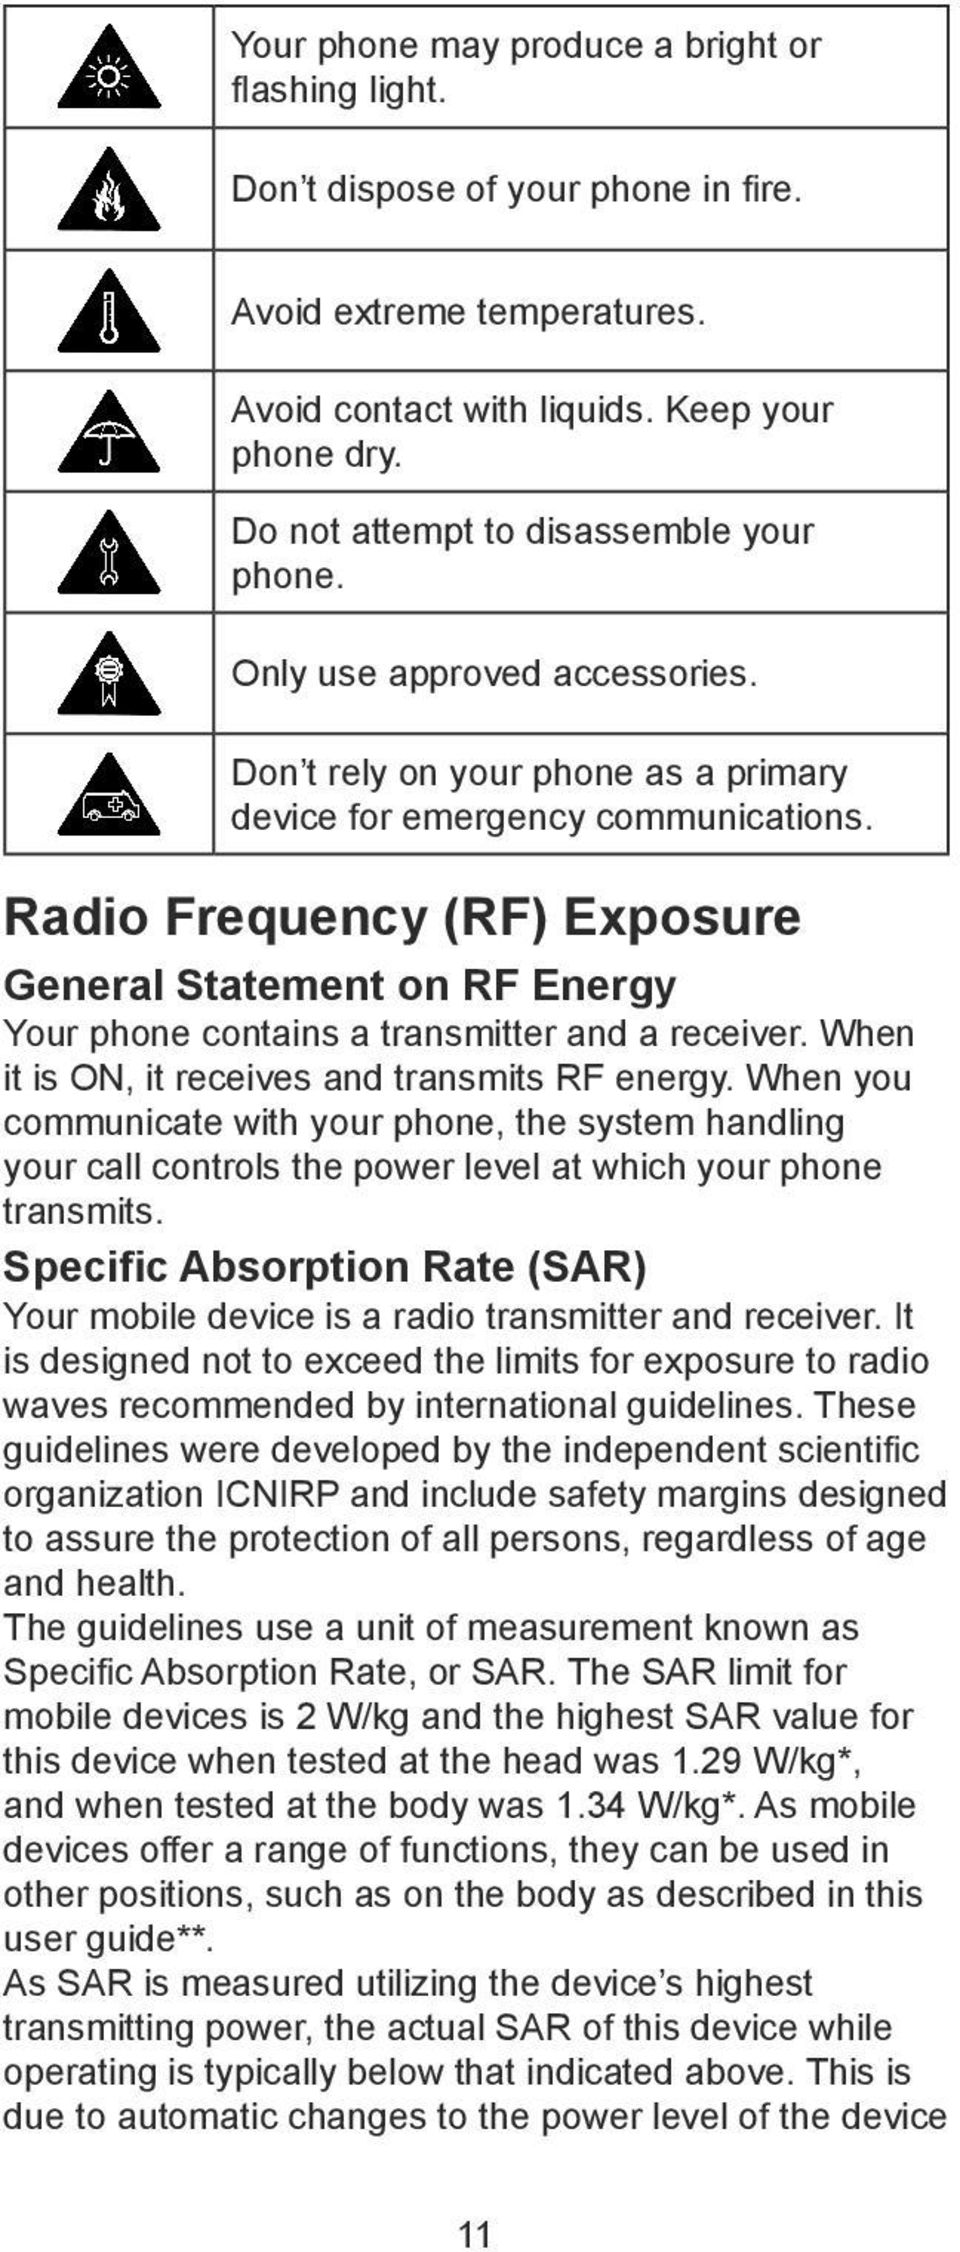 Radio Frequency (RF) Exposure General Statement on RF Energy Your phone contains a transmitter and a receiver. When it is ON, it receives and transmits RF energy.